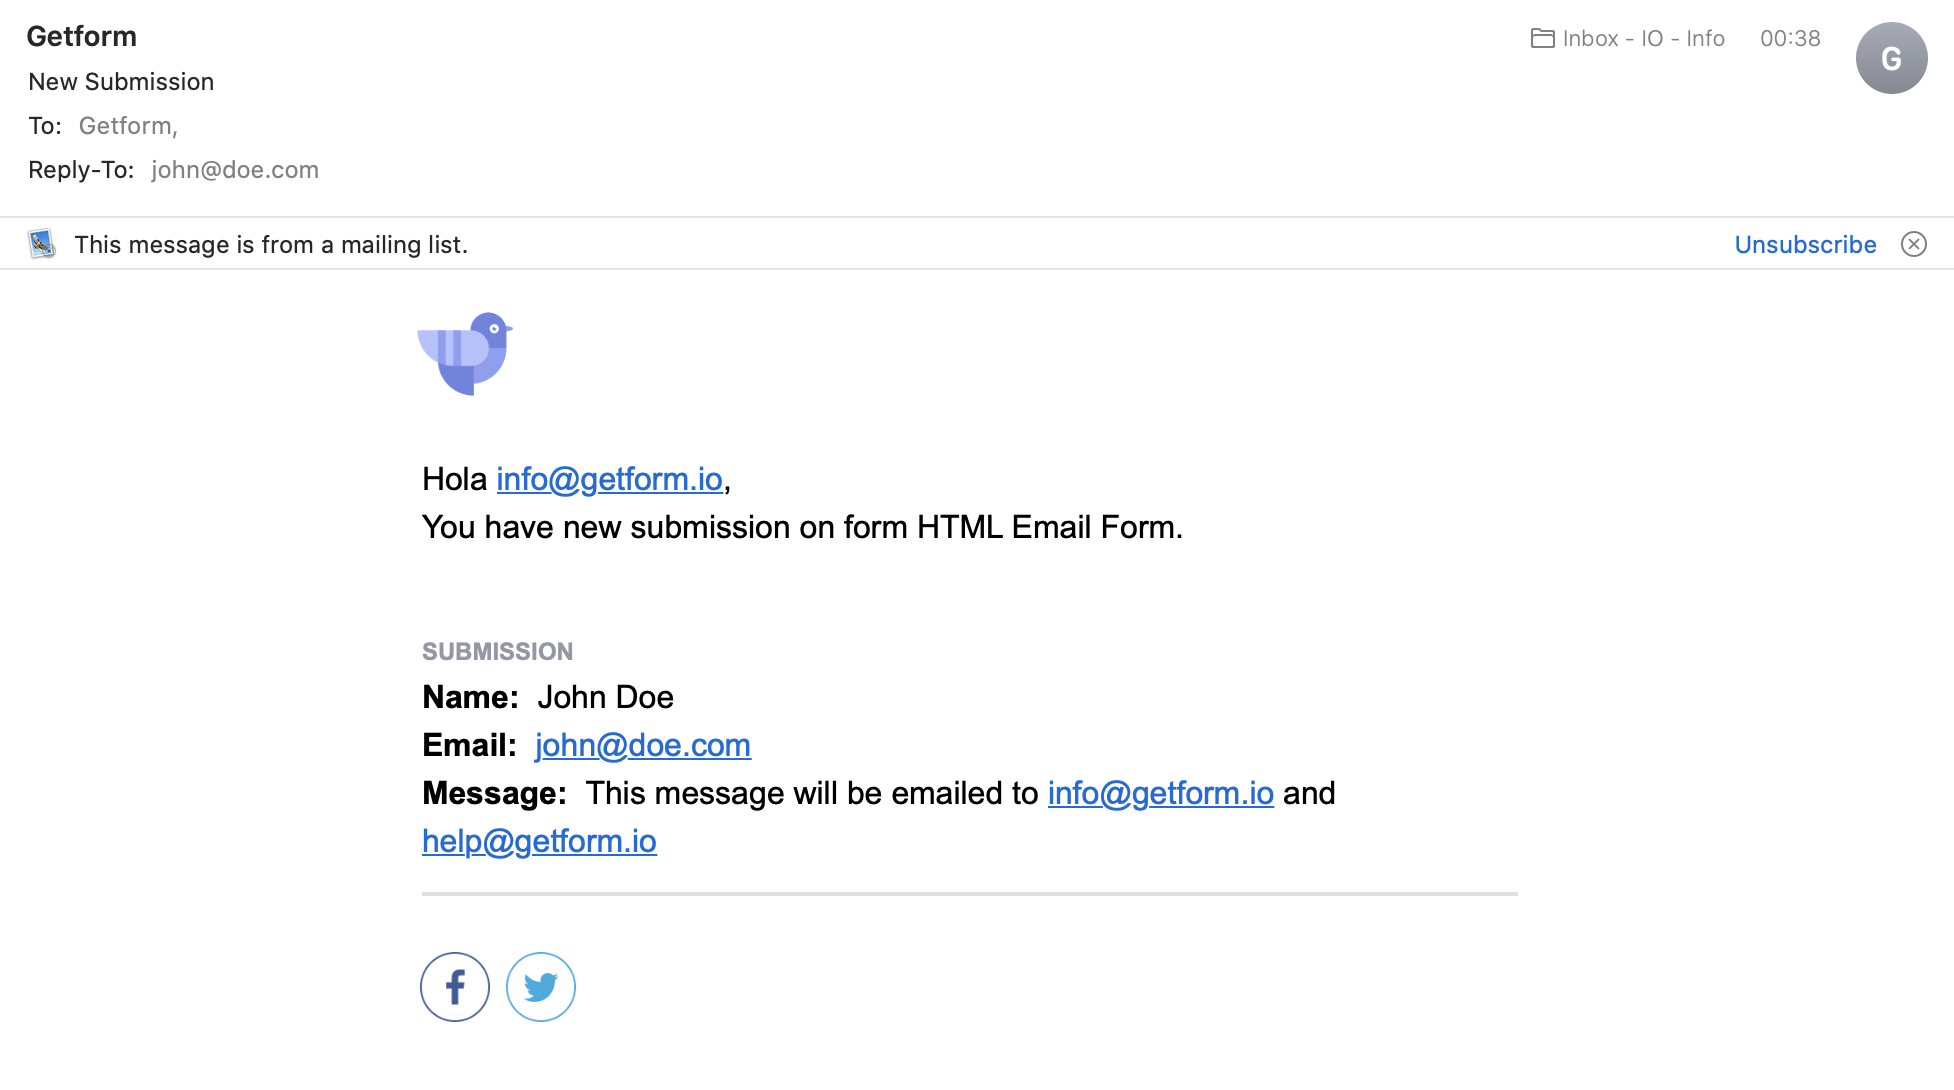 To create an HTML form will send you an email